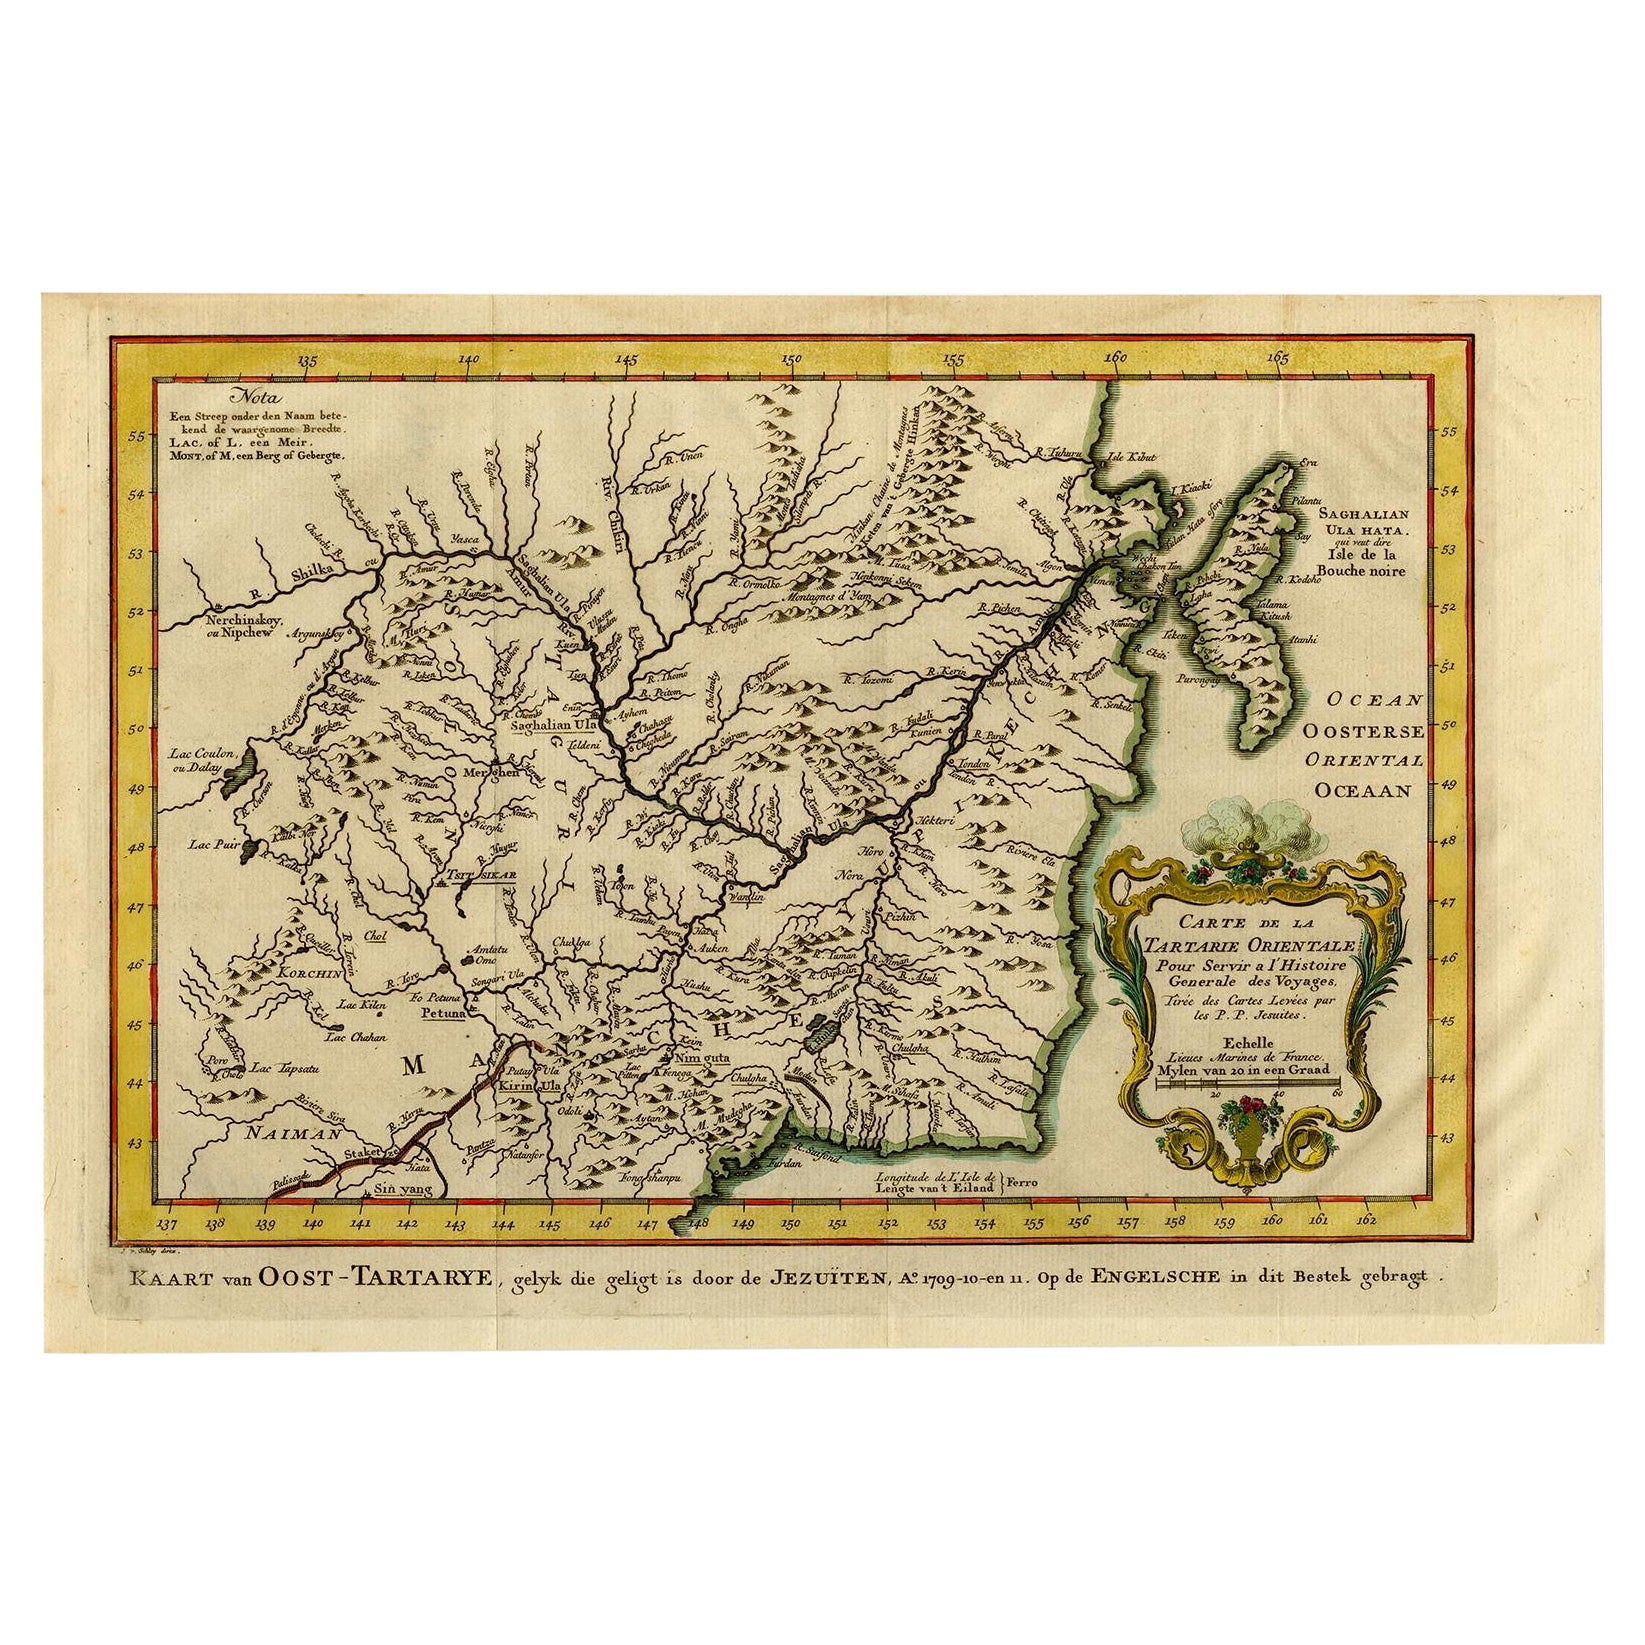 Antique Map of Eastern Tartary, now the Primorsky Krai Area, Russia, 1758